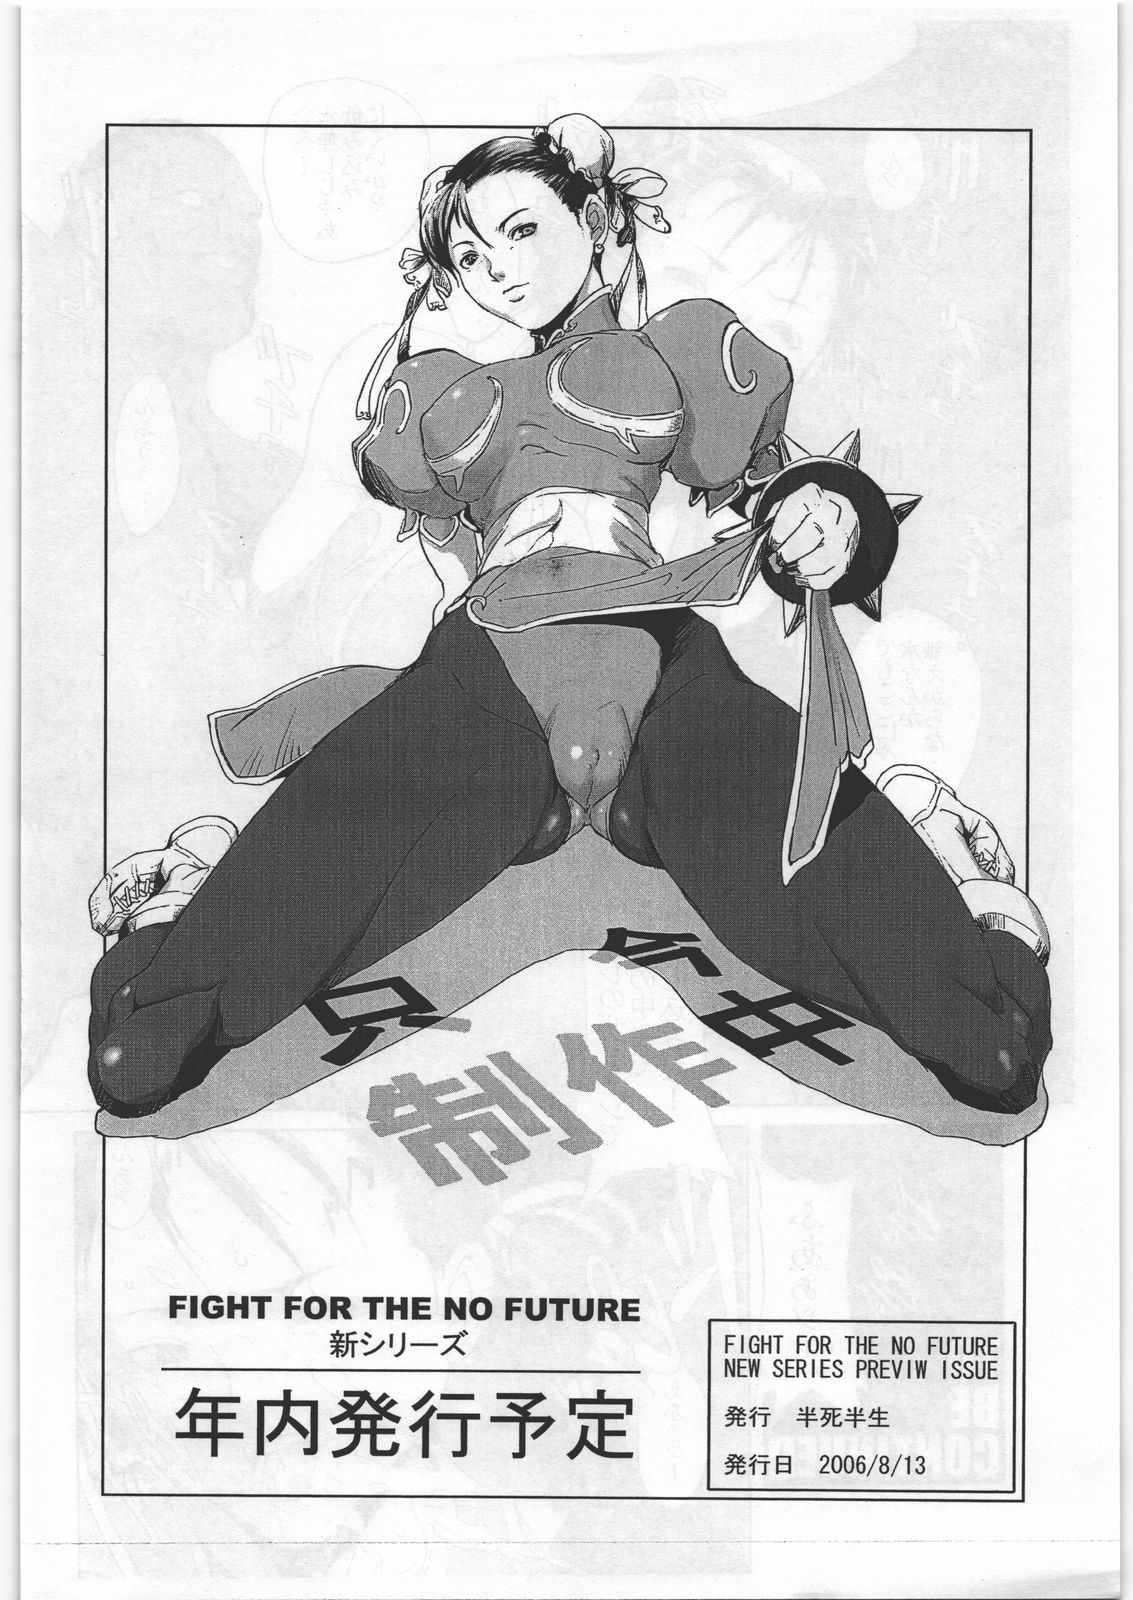 (C70) [Hanshi x Hanshow (NOQ)] FIGHT FOR THE NO FUTURE NEW SERIES PREVIEW (Street Fighter) page 9 full